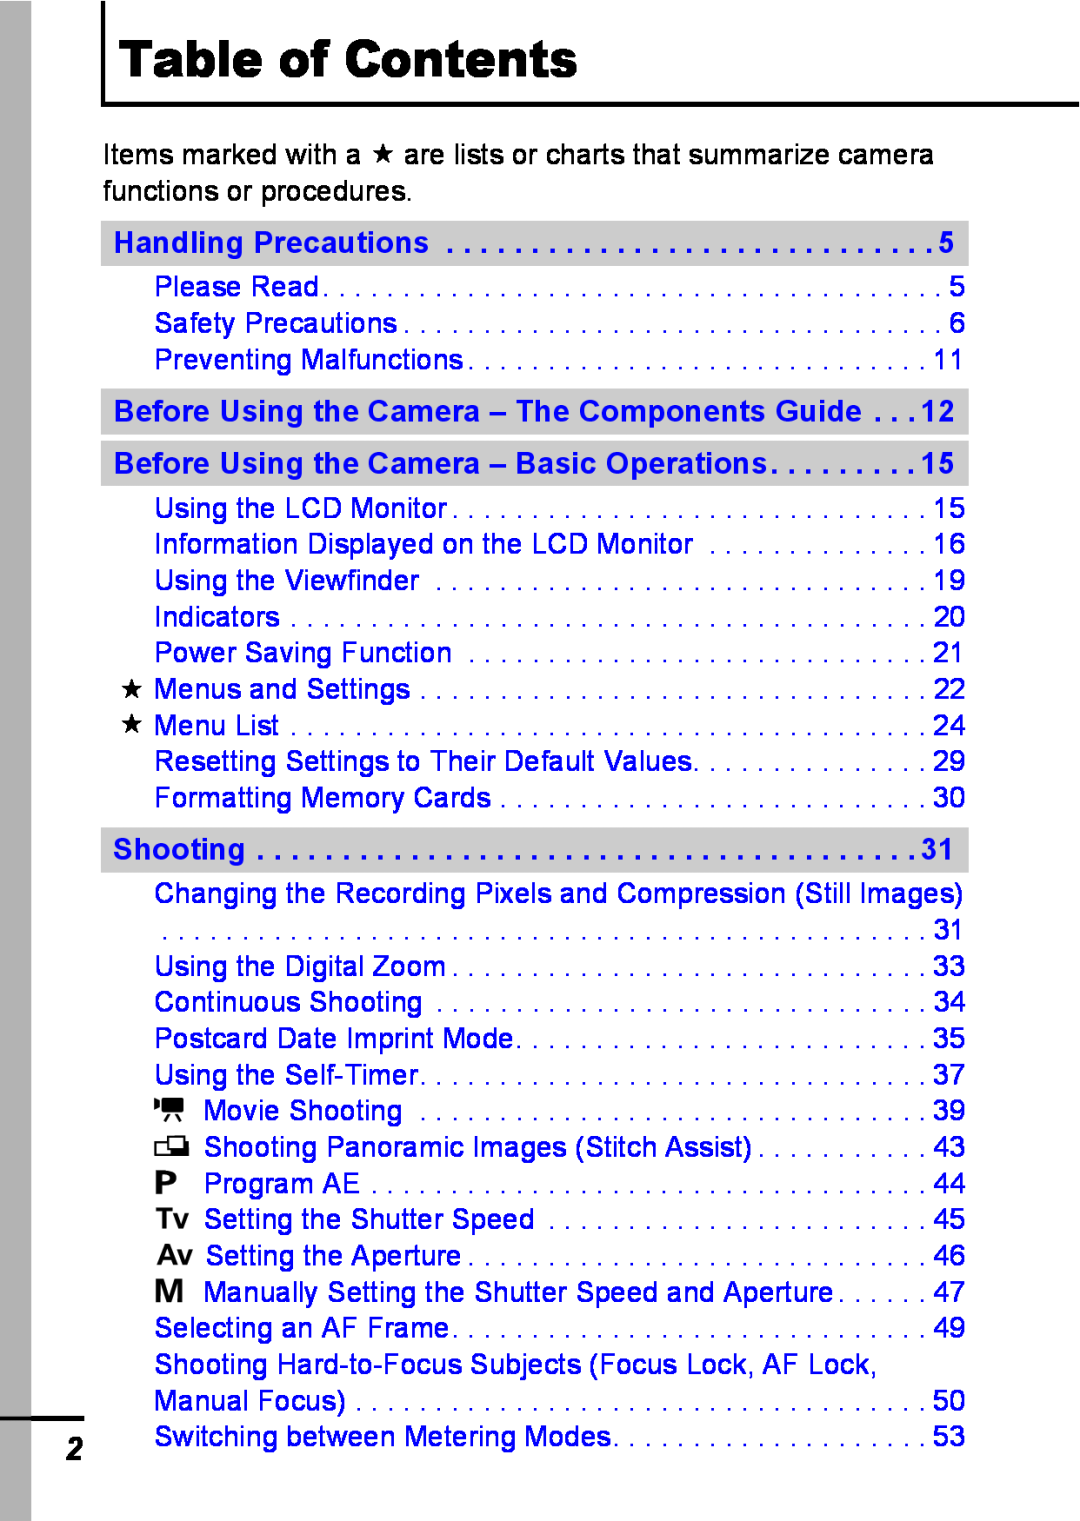 Canon A540 appendix Table of Contents, Handling Precautions, Before Using the Camera - The Components Guide, Shooting 